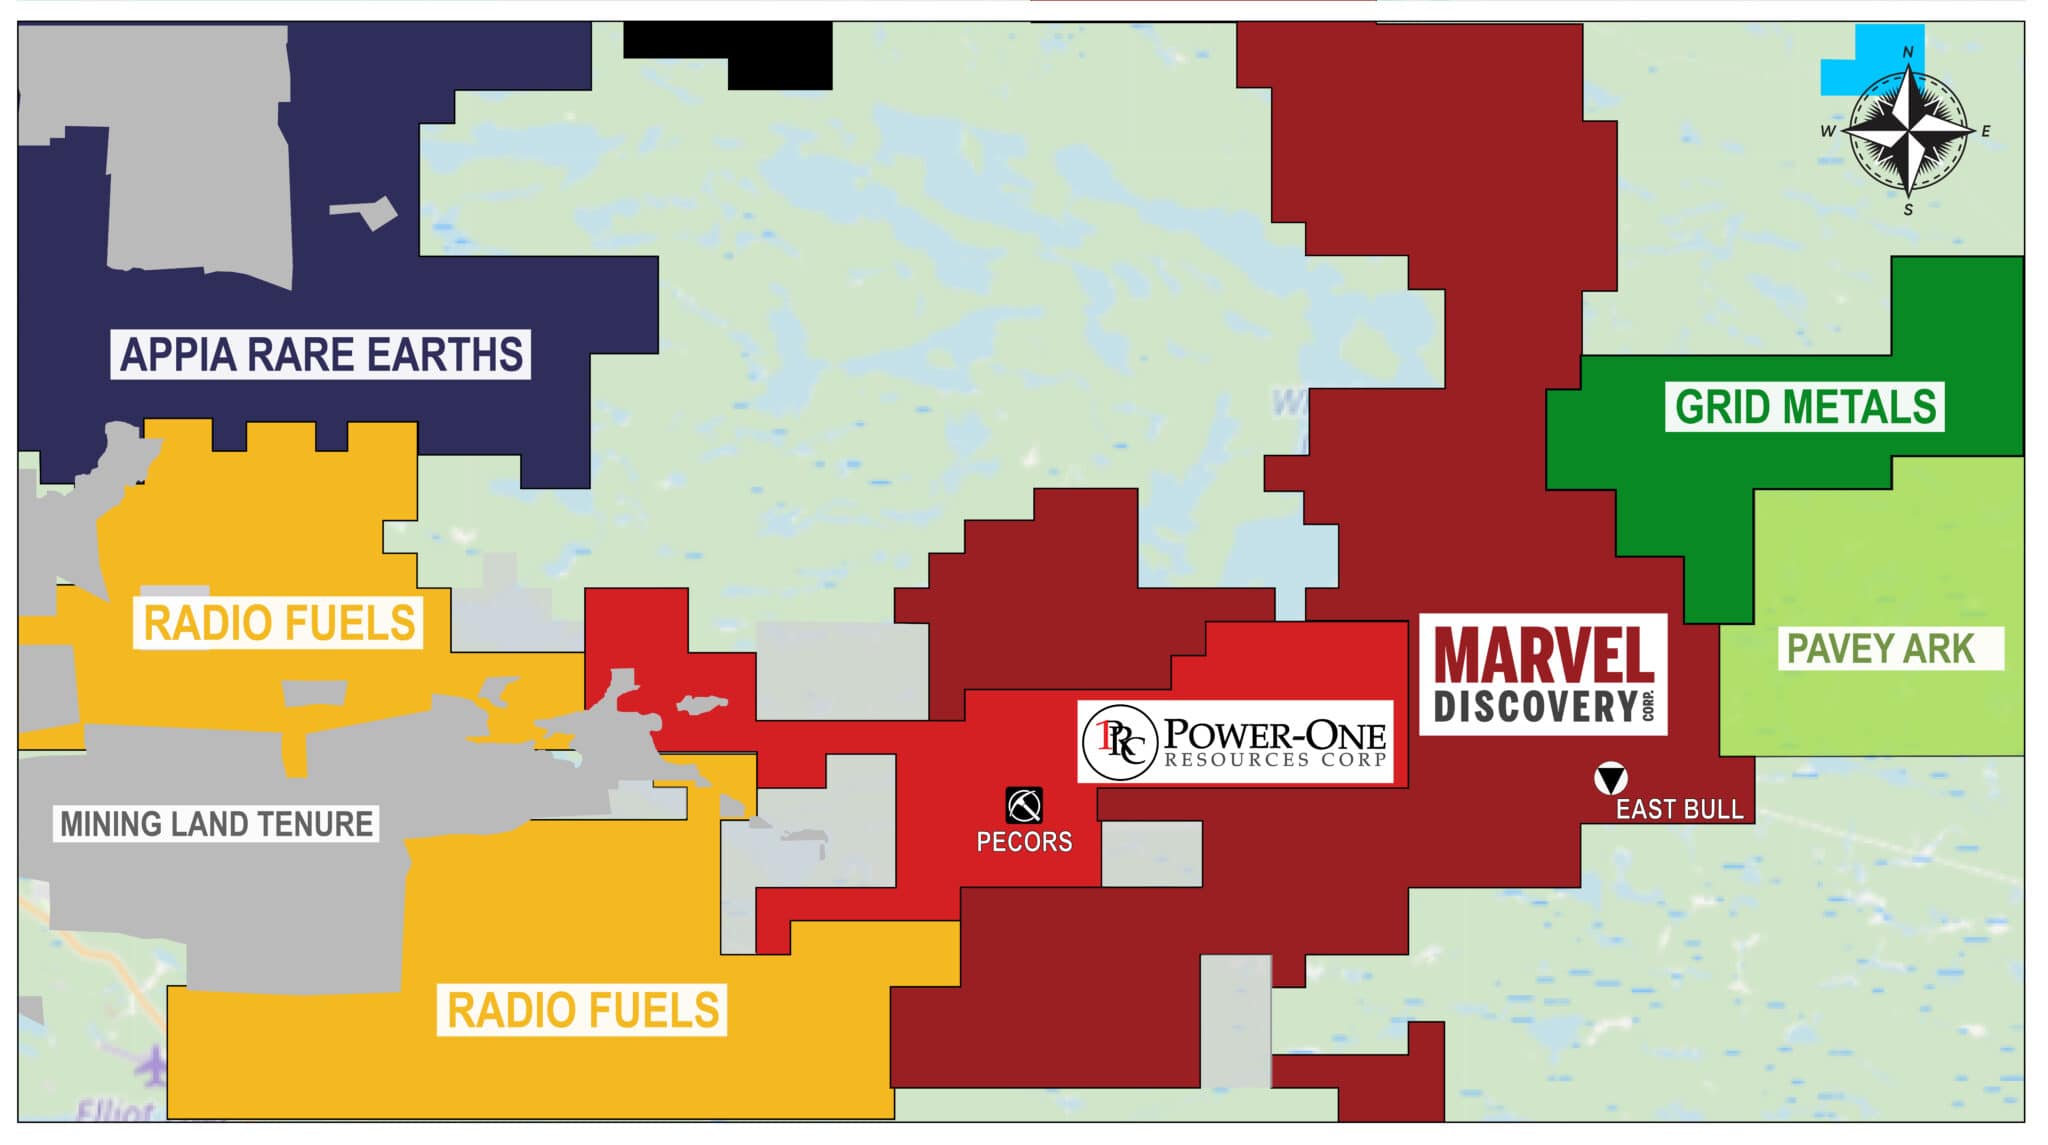 East Bull Property​ Pecors Marvel Discovery Power One Corp. Pecors - ONT​